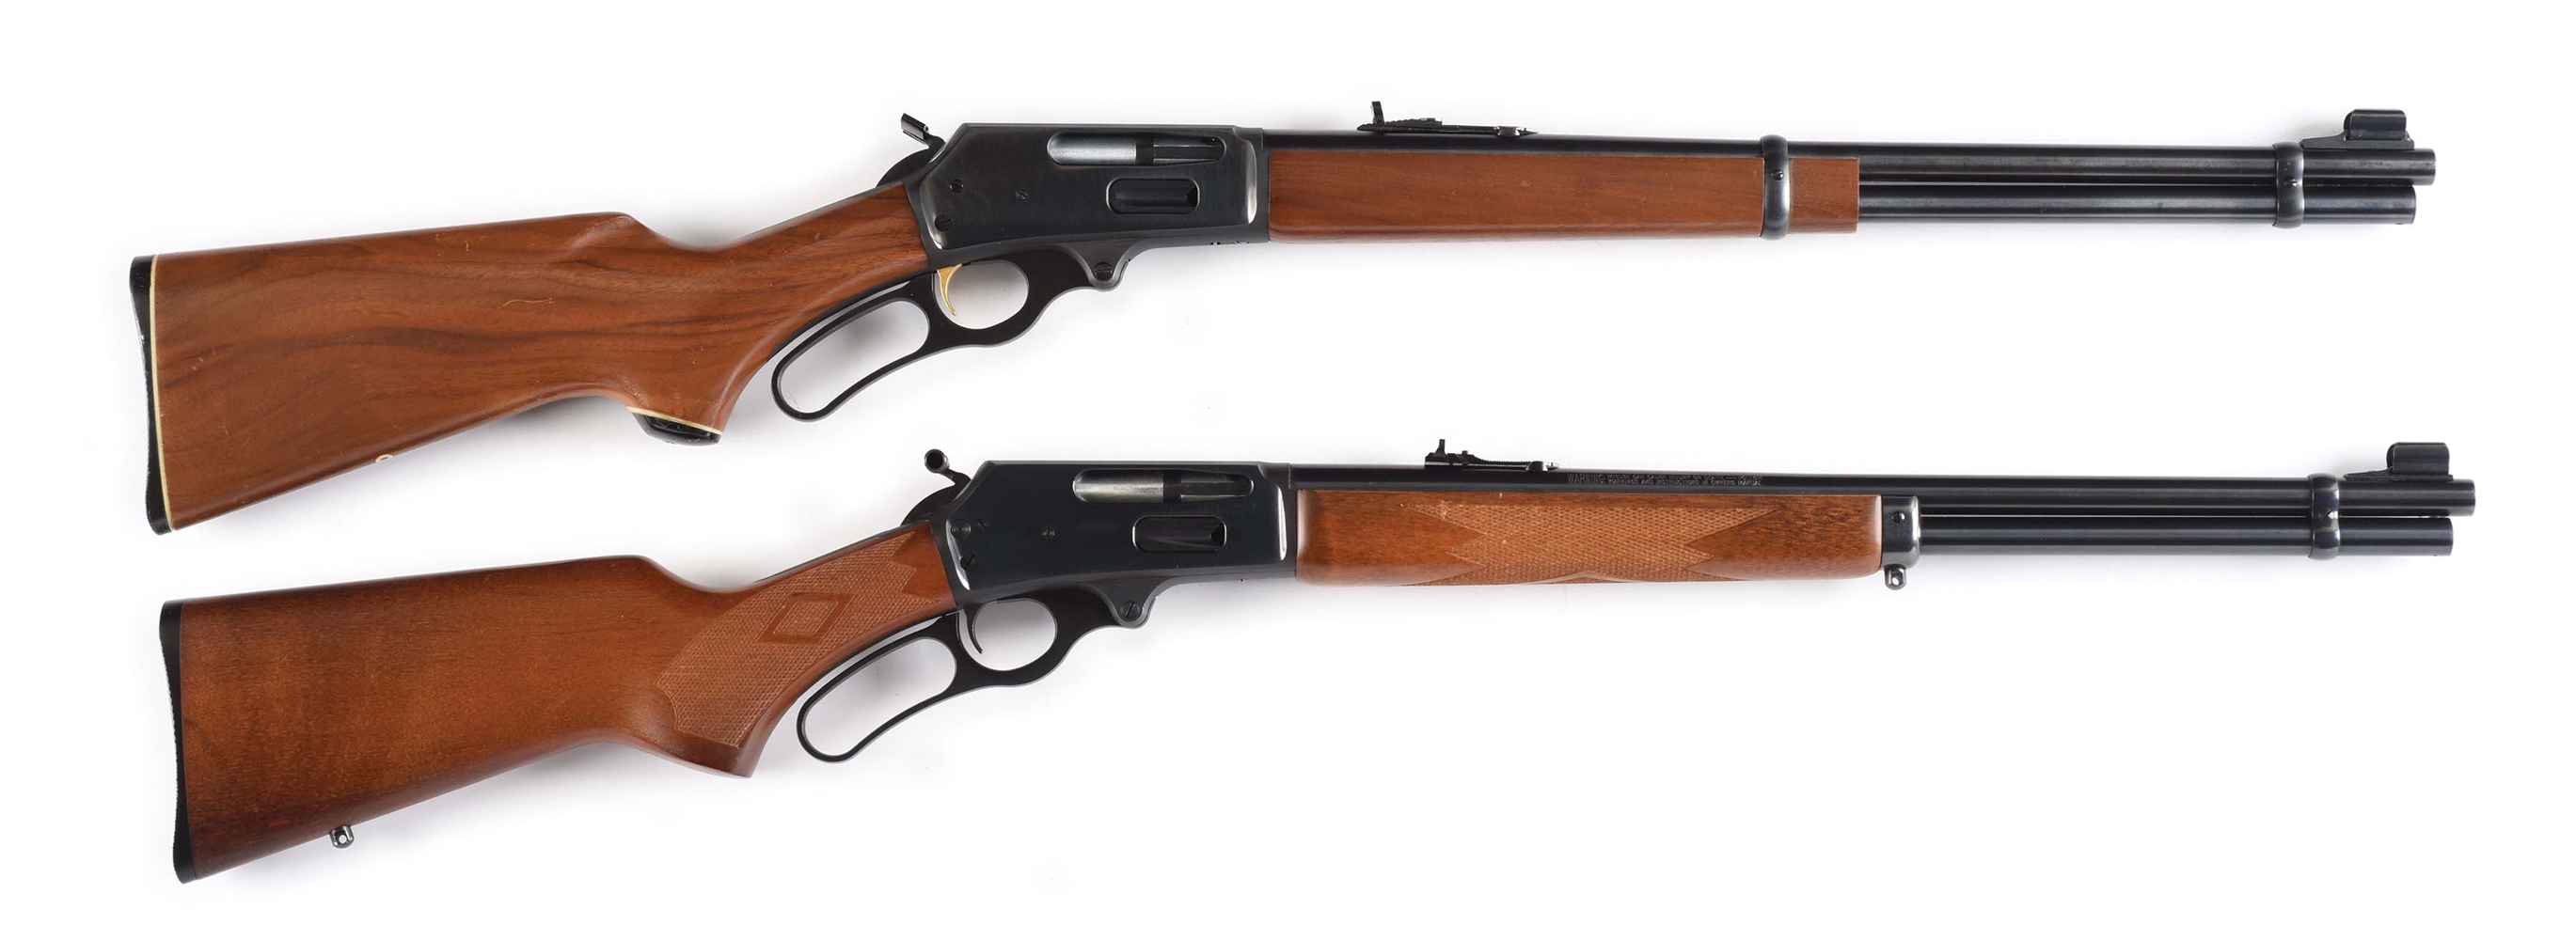 (M) LOT OF 2: NIB MARLIN 30AS AND AS NEW MARLIN 336 LEVER ACTION RIFLES.